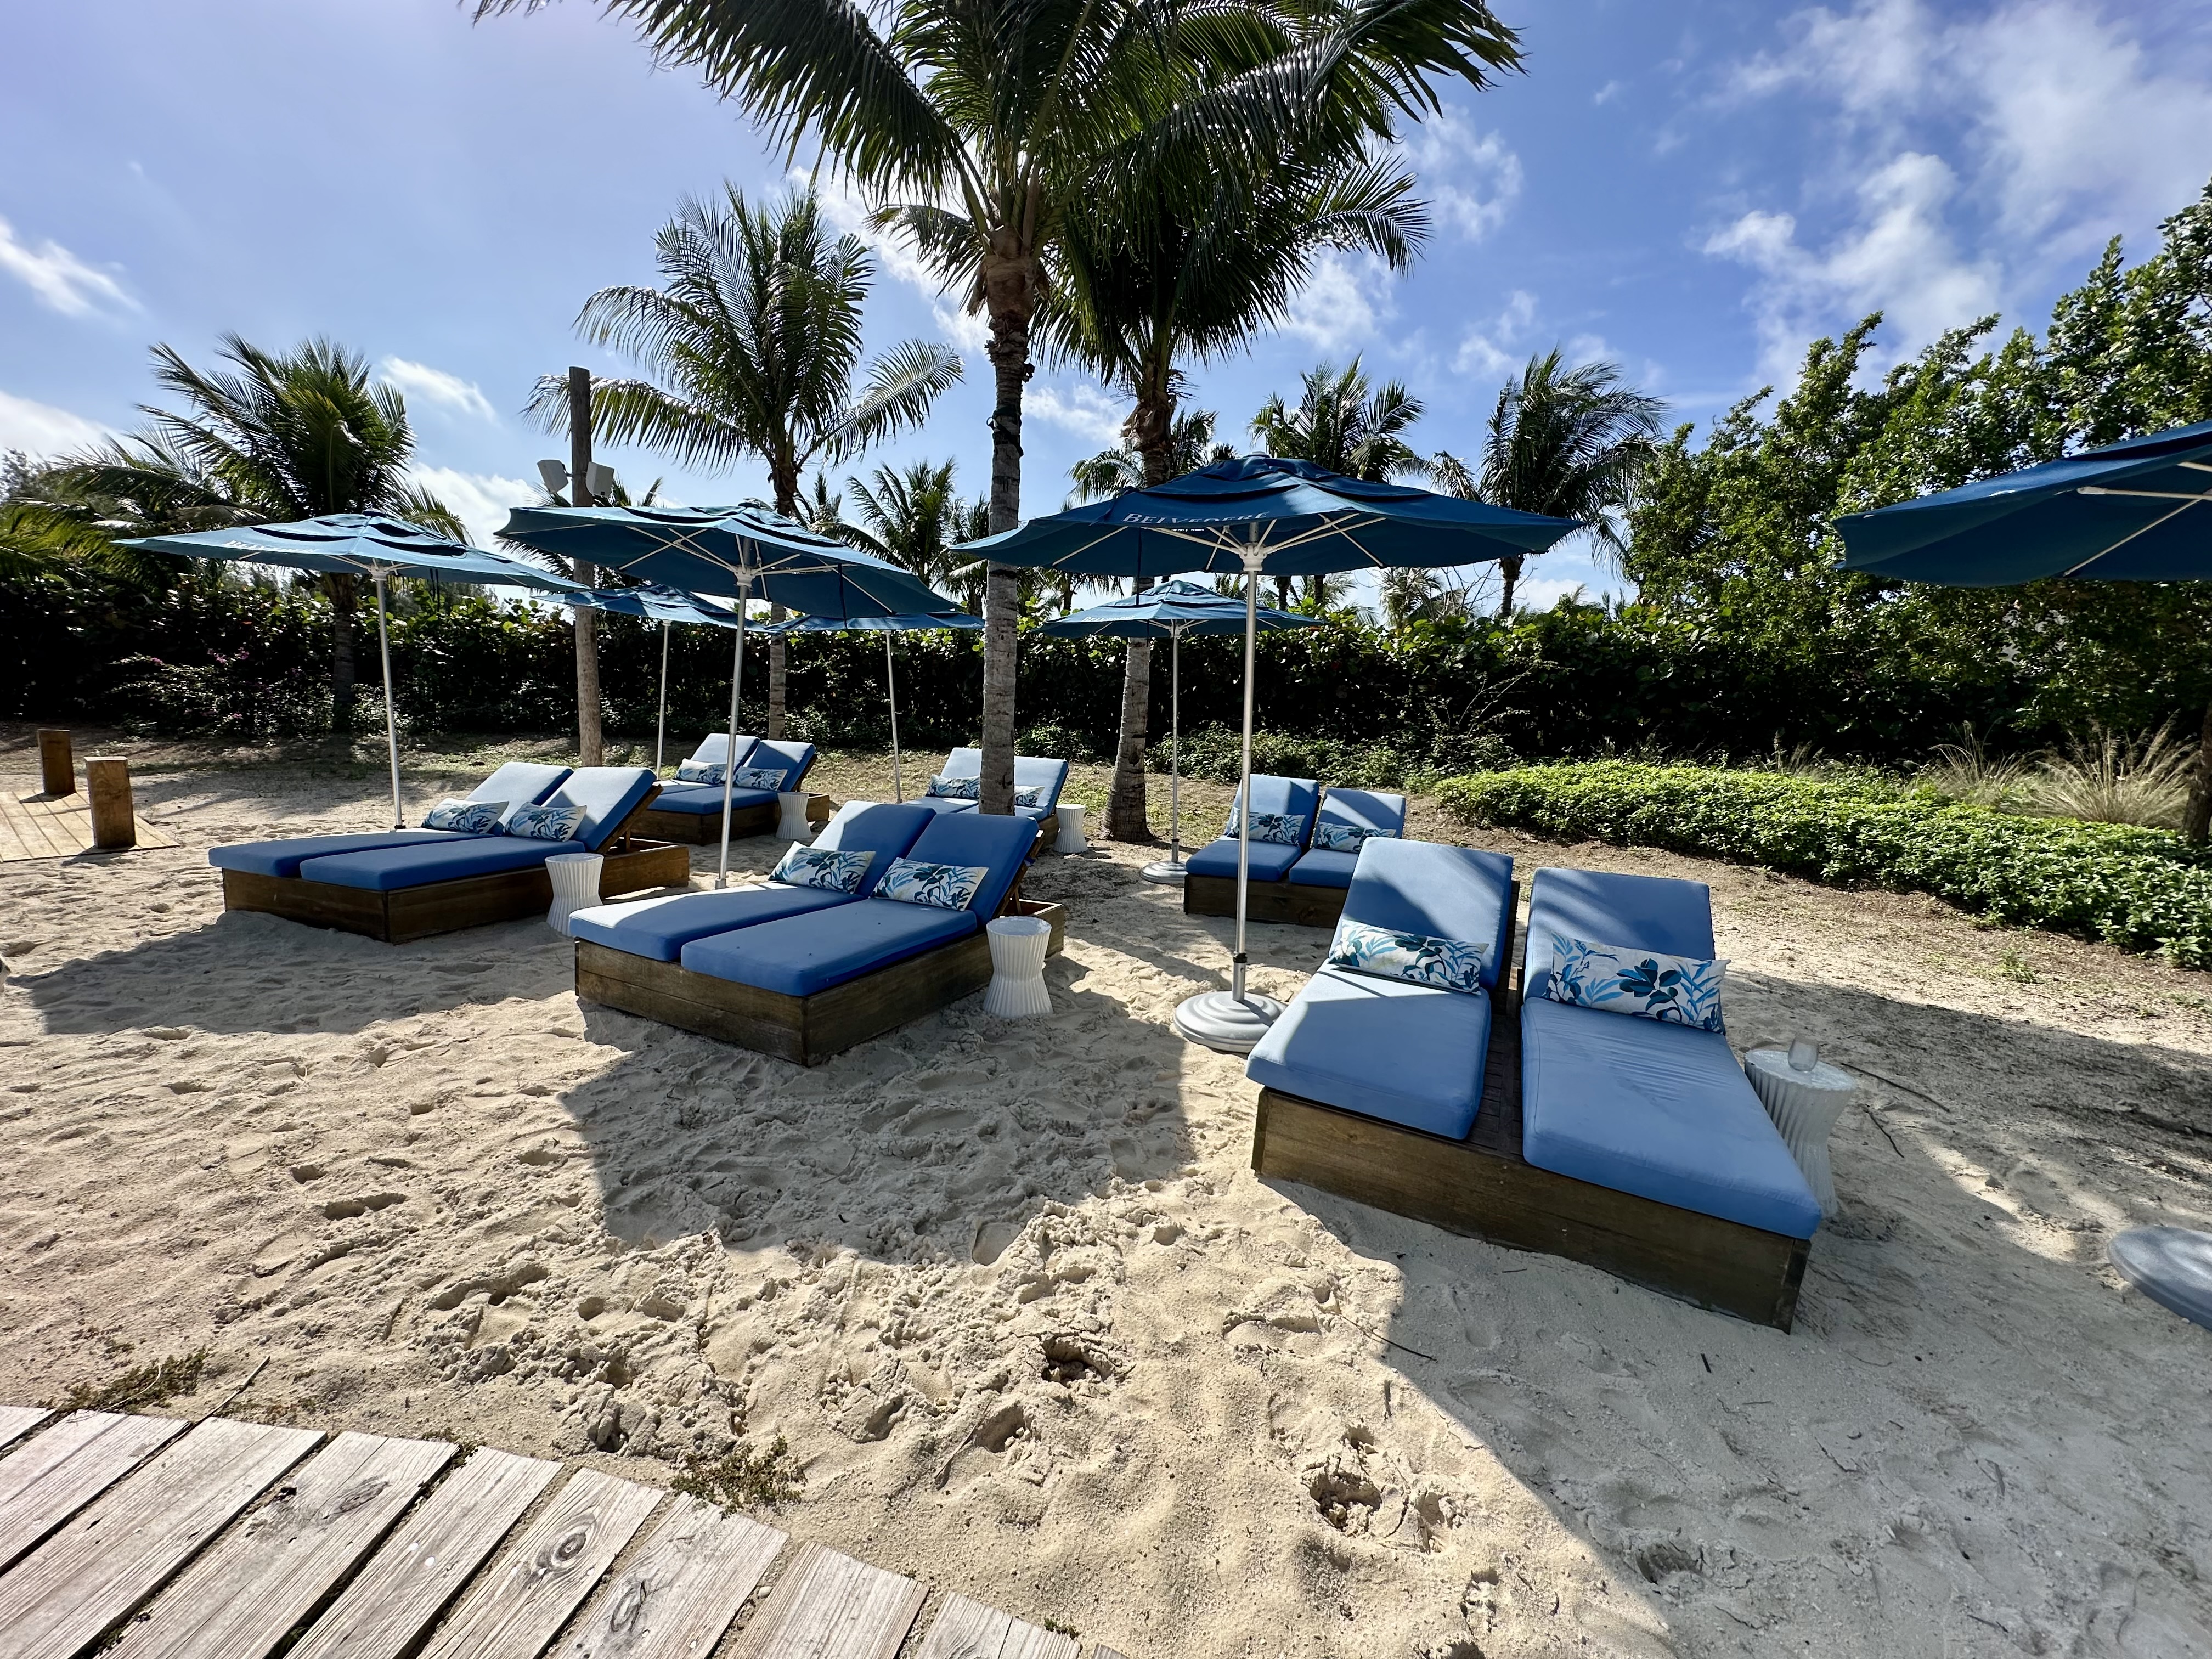 a group of blue lounge chairs and umbrellas on a beach